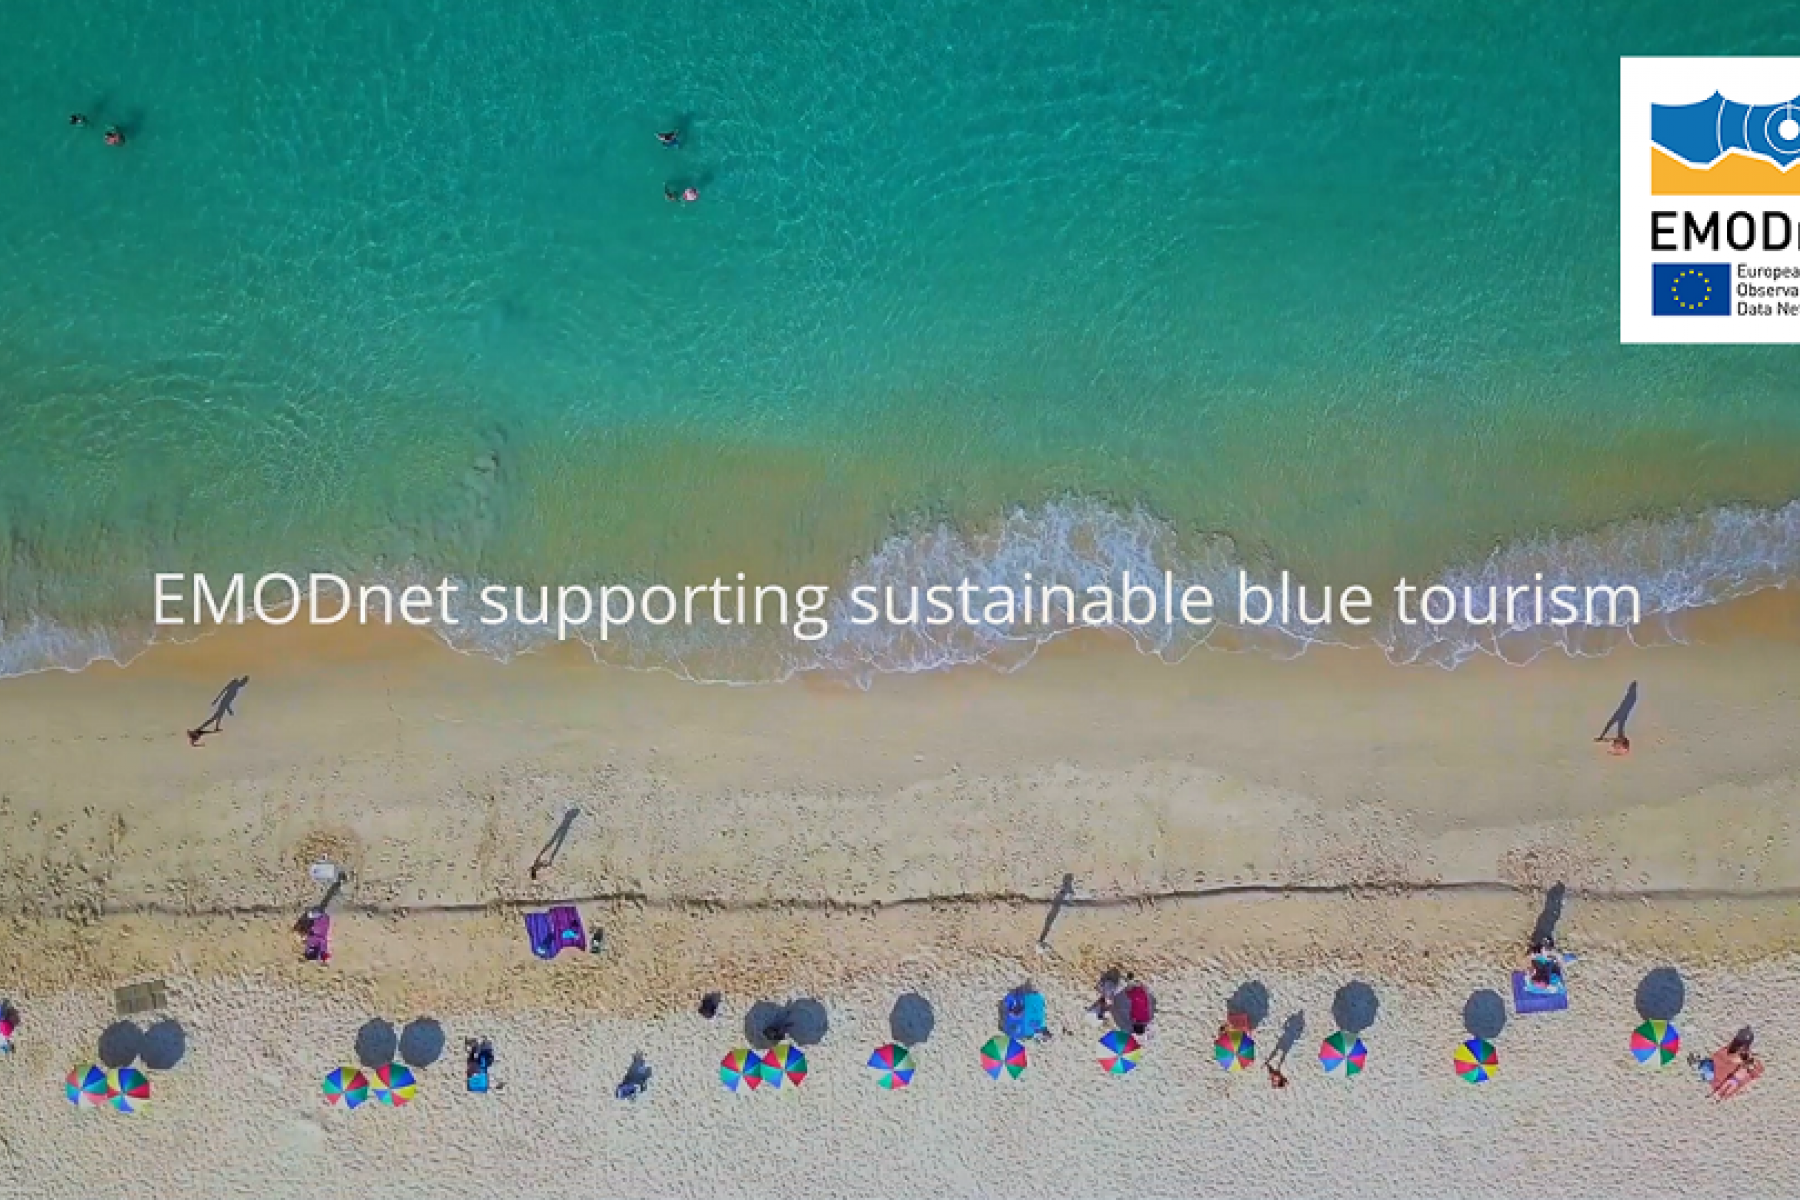 EMODnet supporting sustainable blue tourism